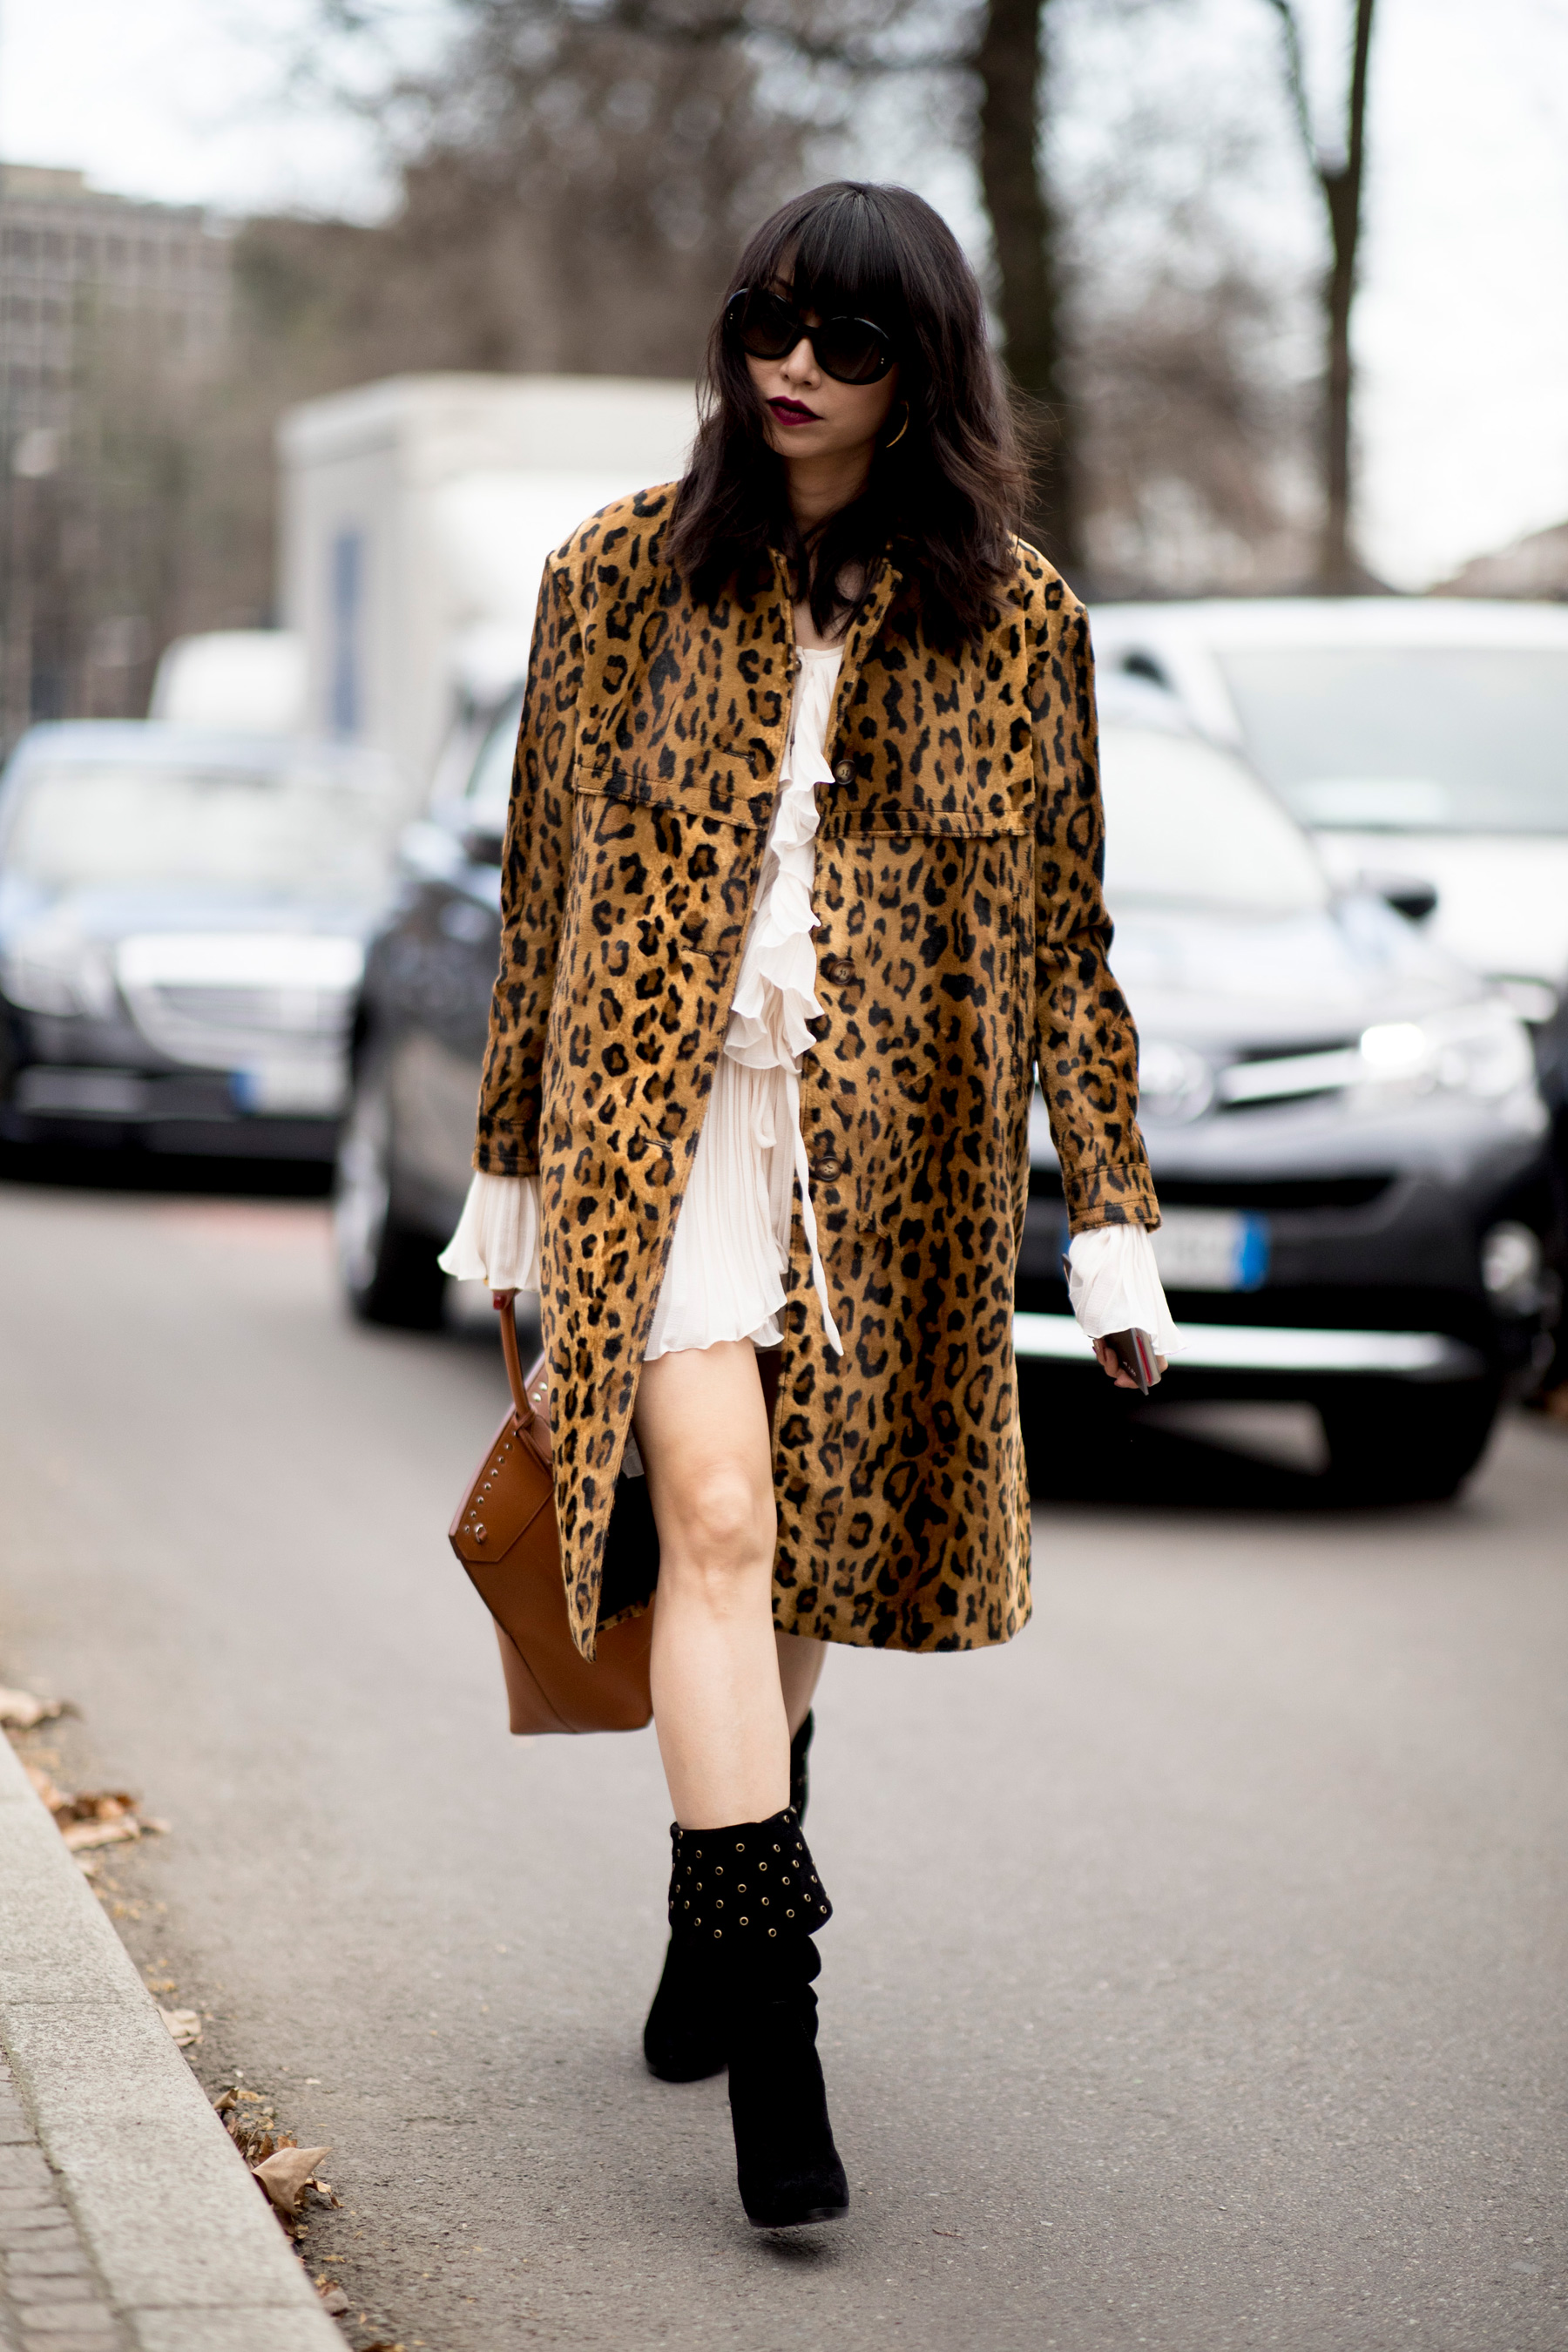 Snow Street Style Pictures